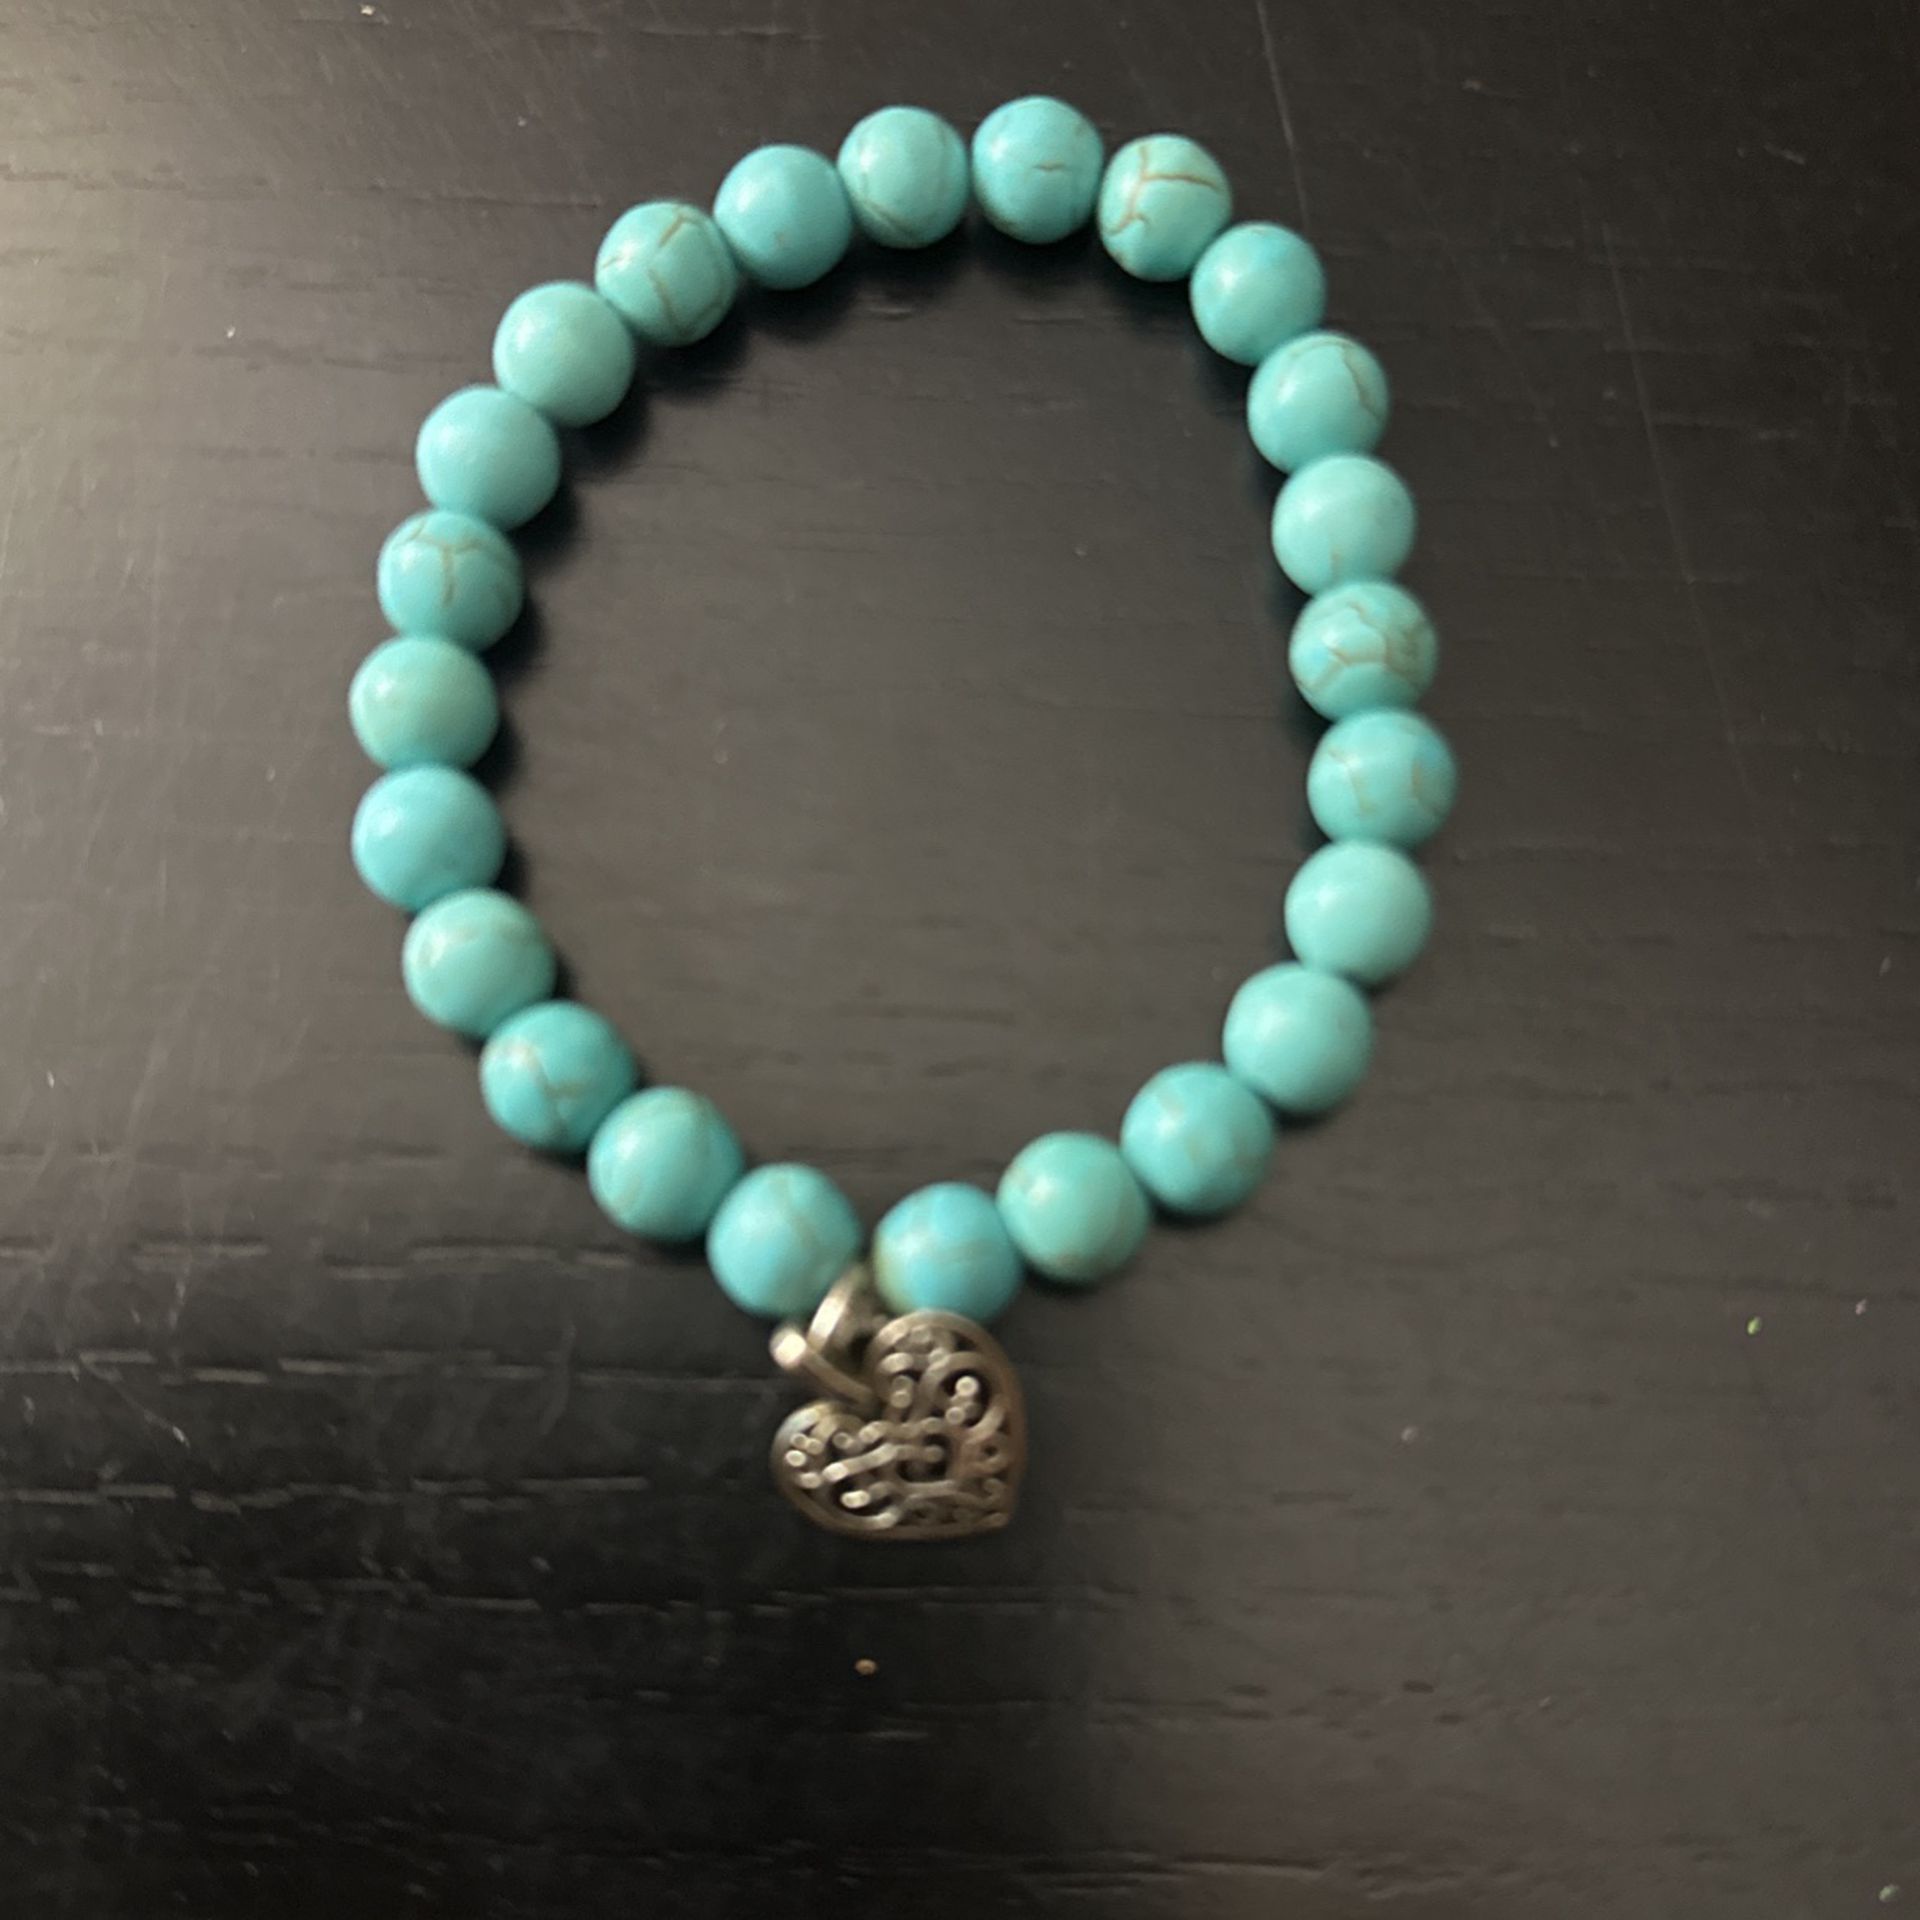 Blue Turquoise Bracelet With A Heart Charm